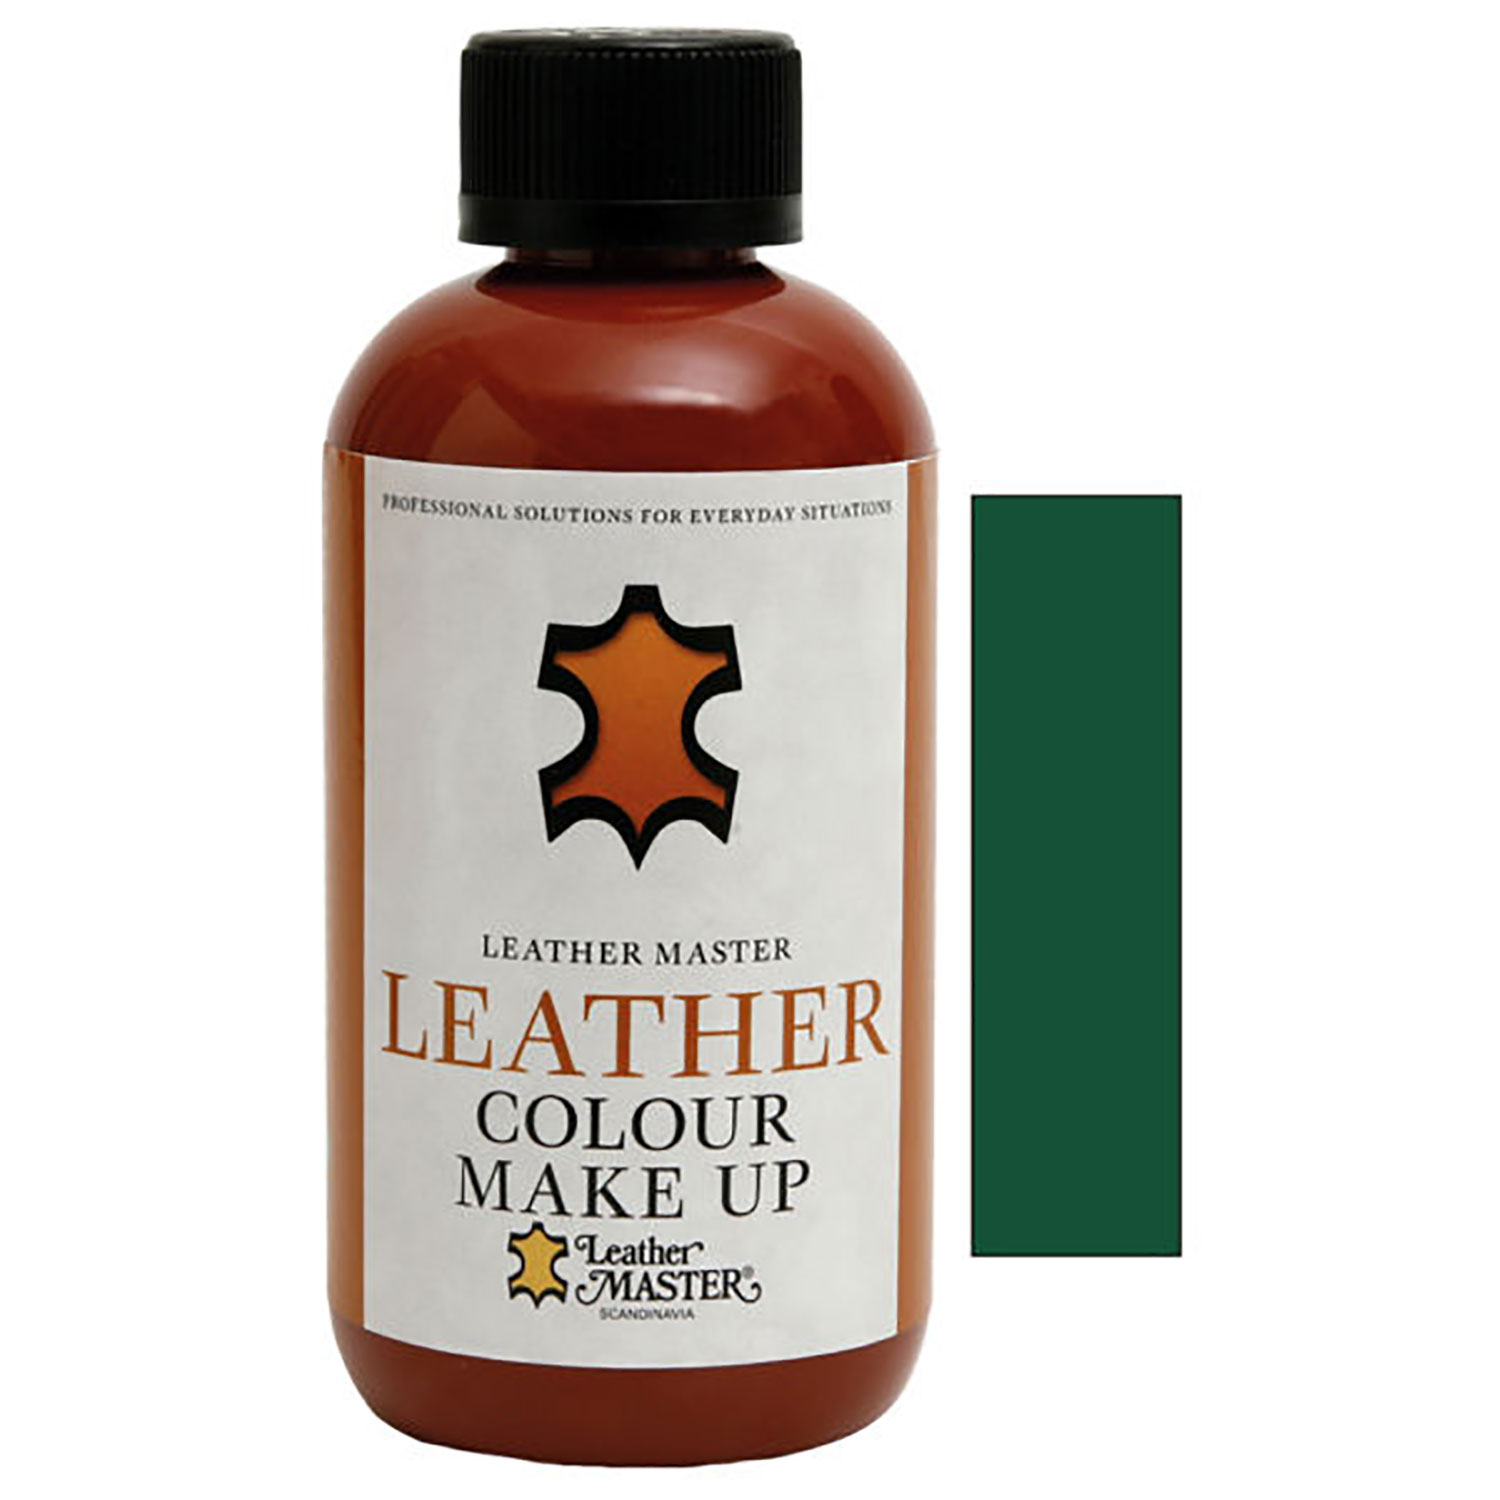 Leather Master Colour make up – grass green 250 ml